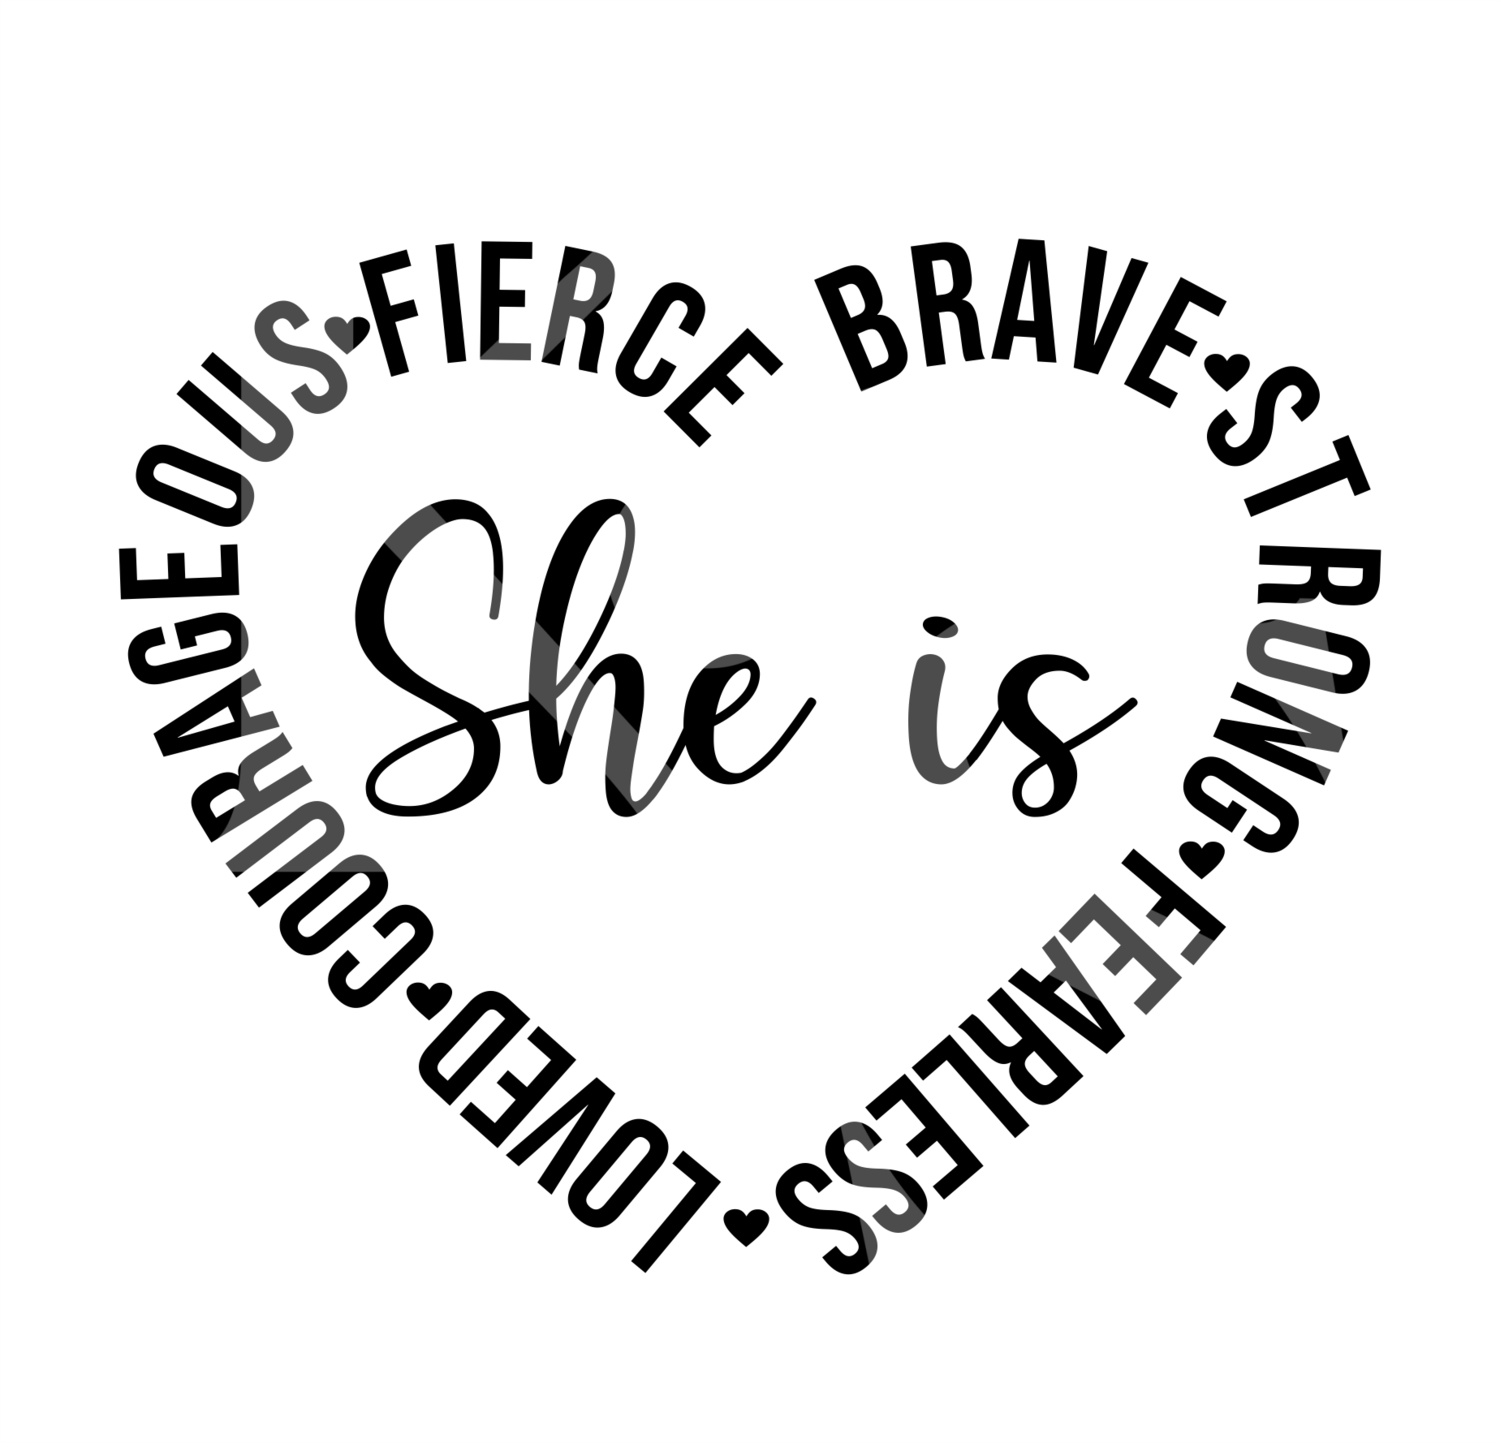 She is Strong, Fierce, Fearless, Brave, Loved, Courageous SVG, Motivational Quote, Mom life SVG, Strong Mom, Mama, Silhouette SVG